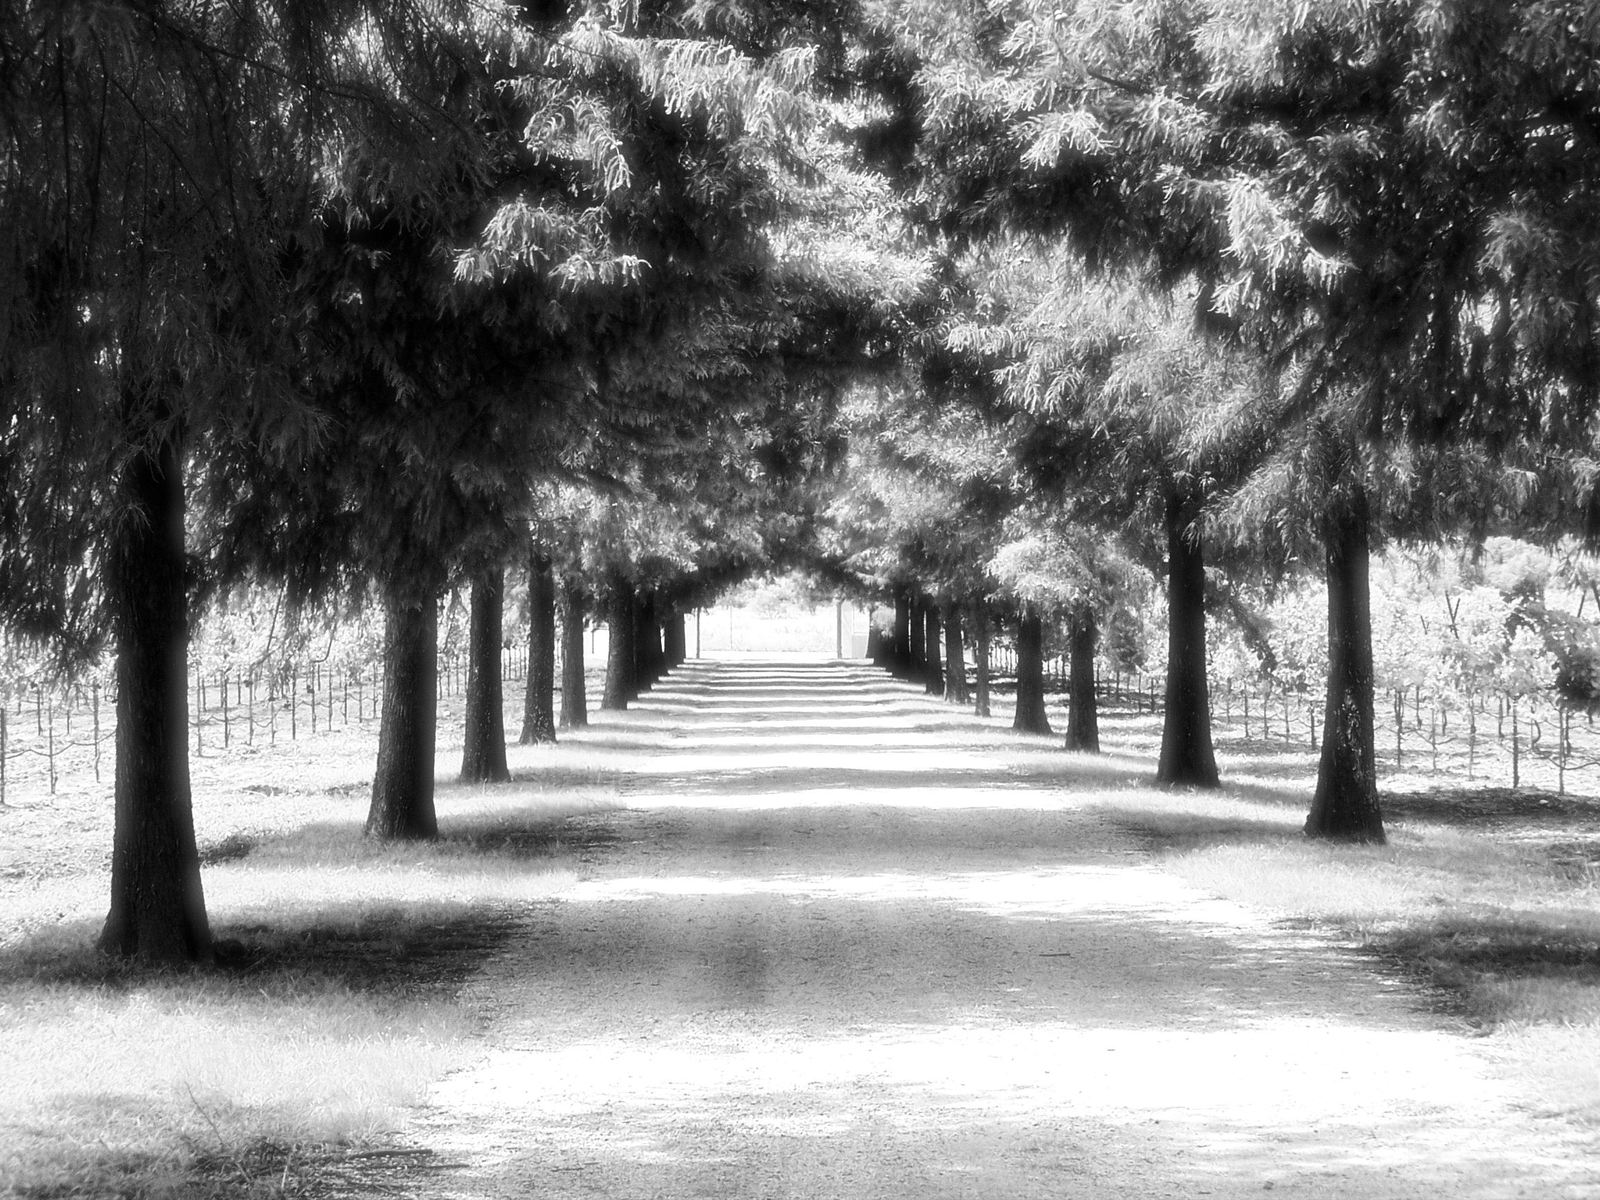 the black and white po shows a tree lined walkway